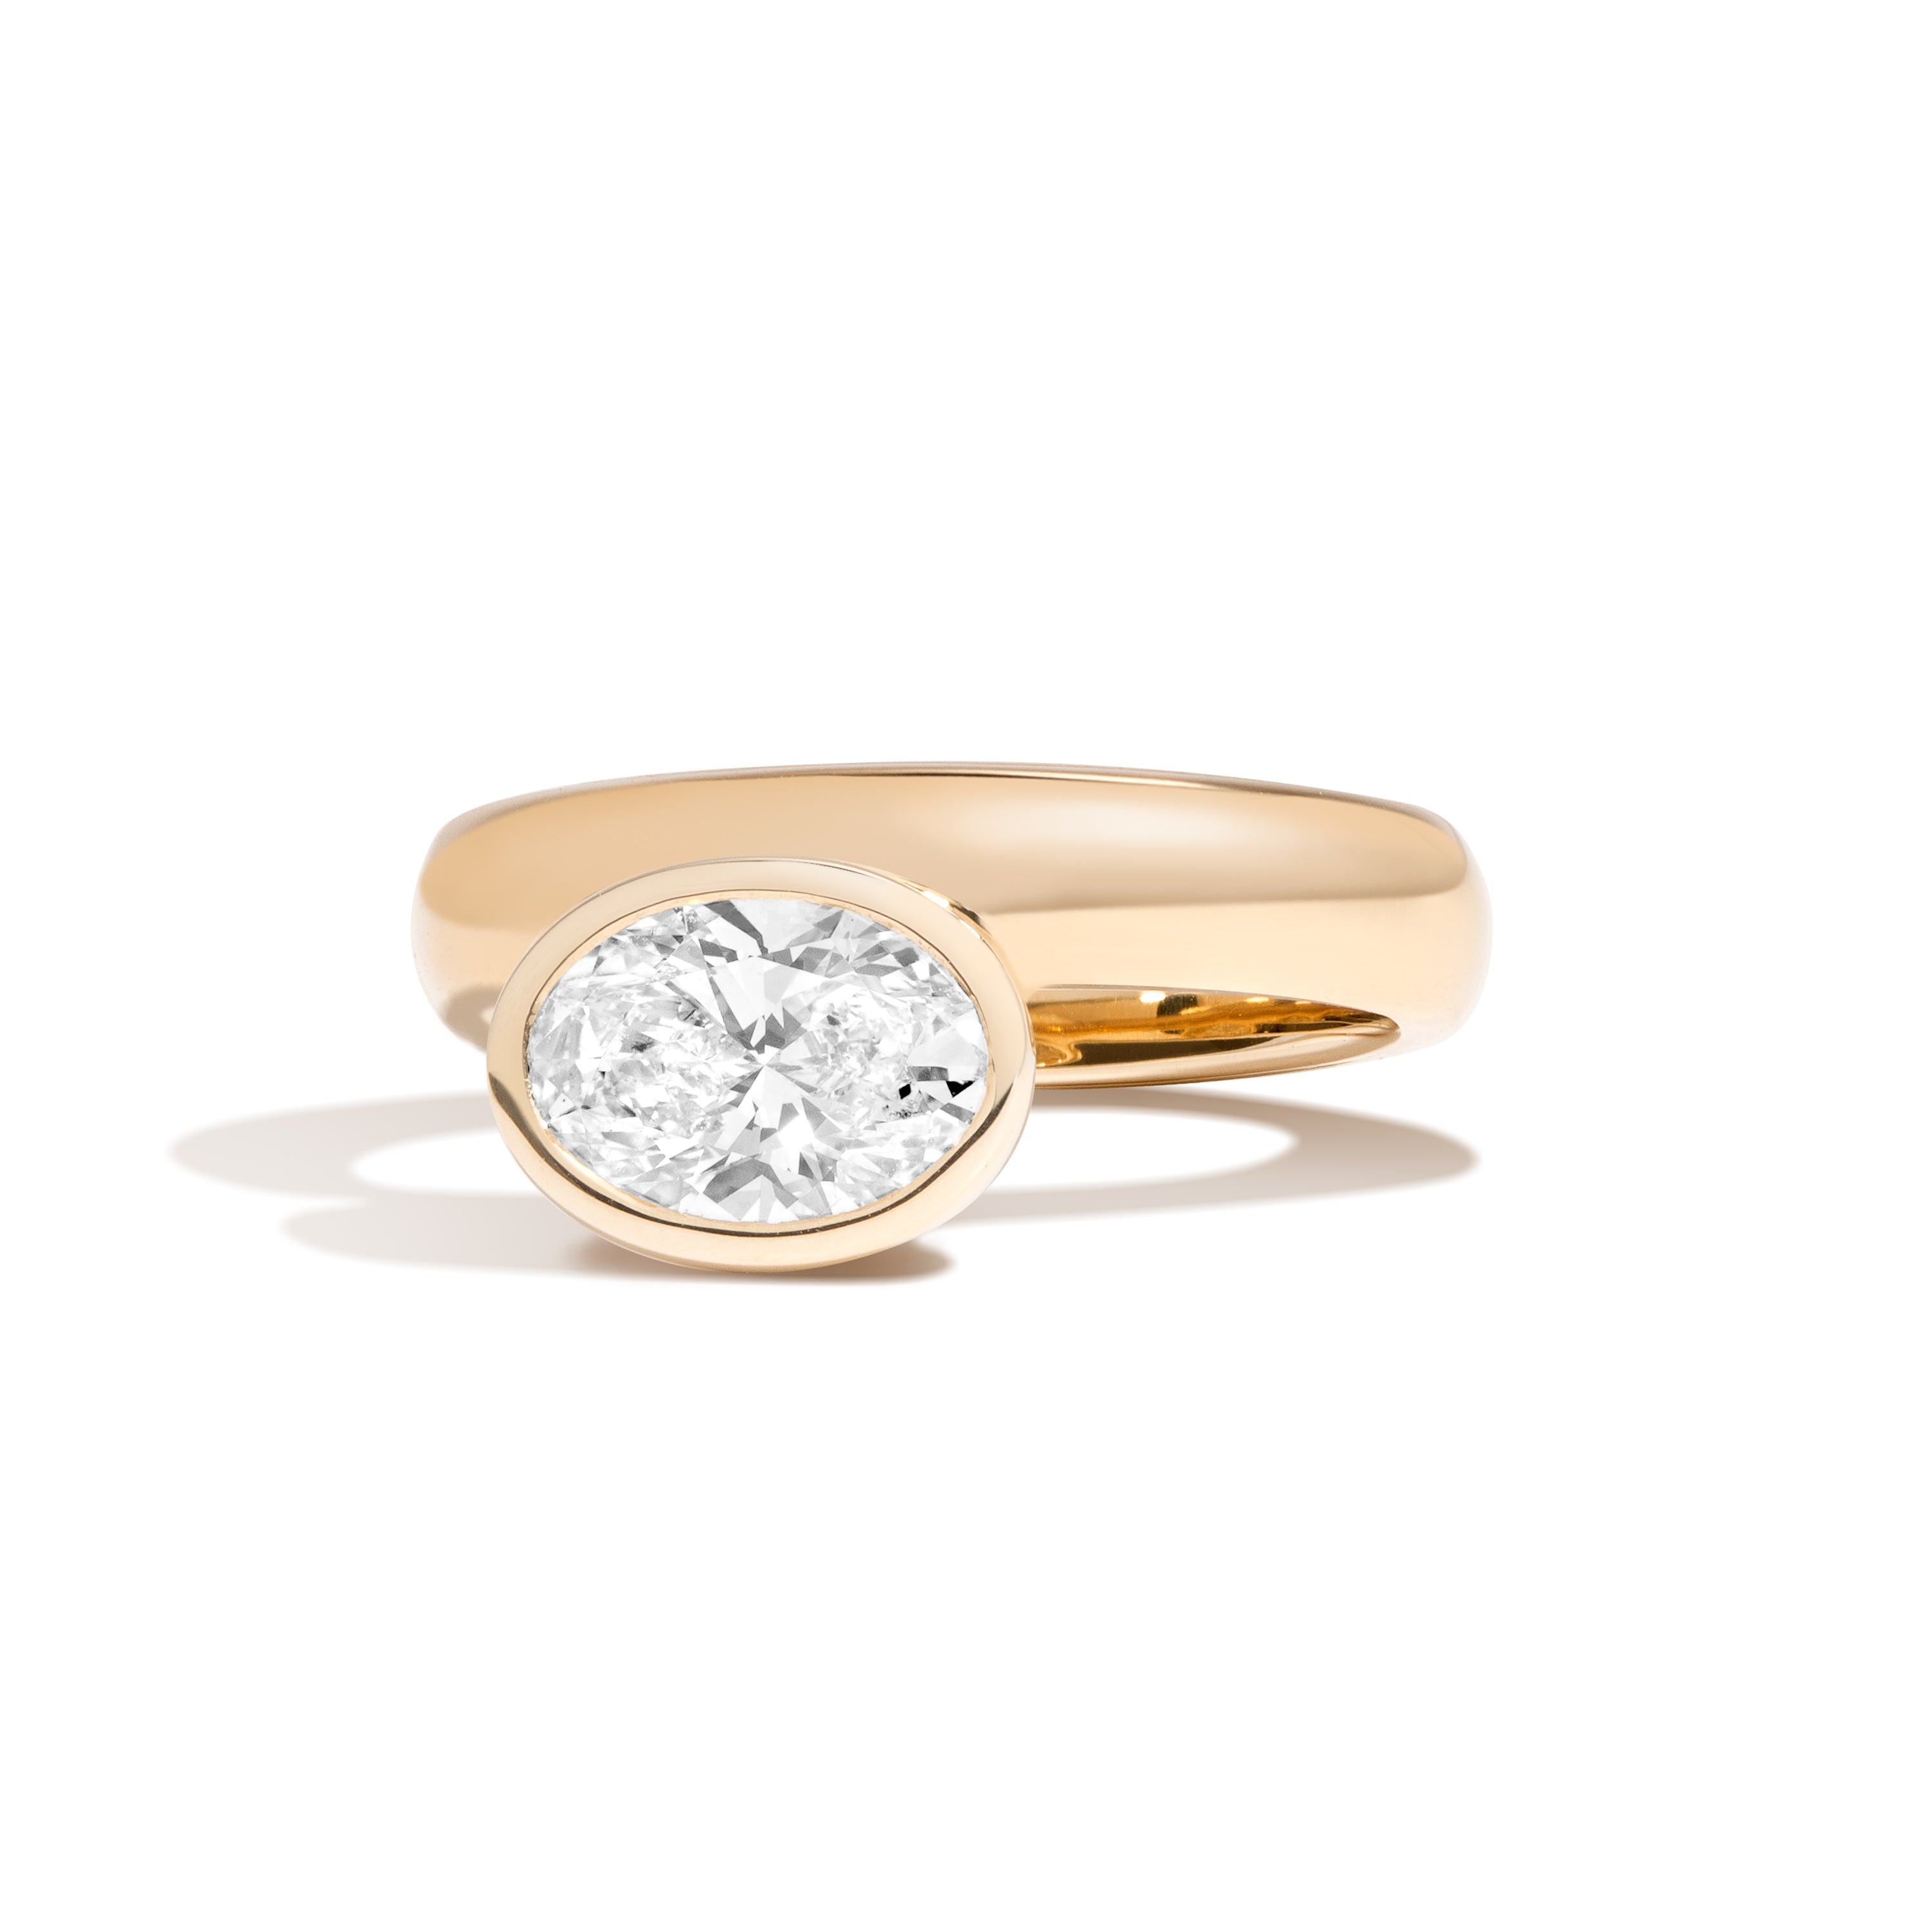 Shahla Karimi Aether X Shahla Oval Wide Side Set Rivet Engagement Ring 14K Yellow Gold